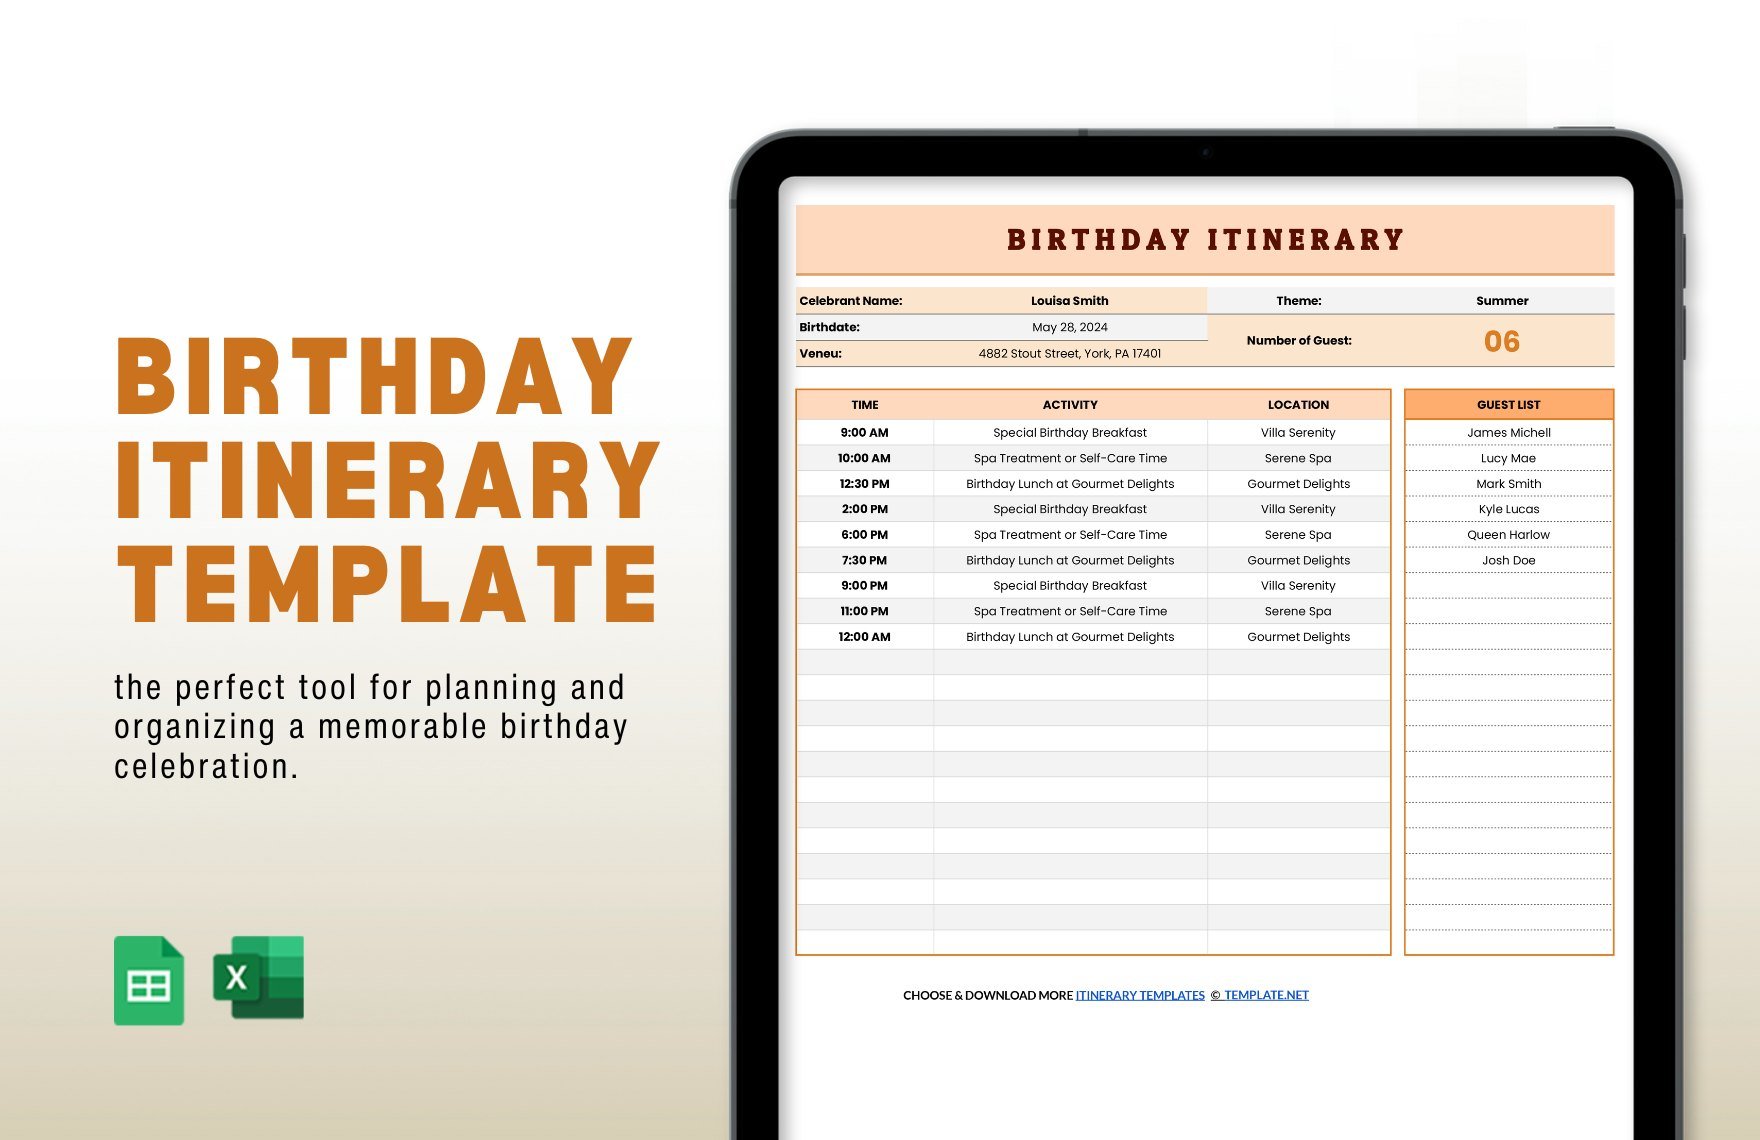 Free Birthday Itinerary Template in Excel, Google Sheets